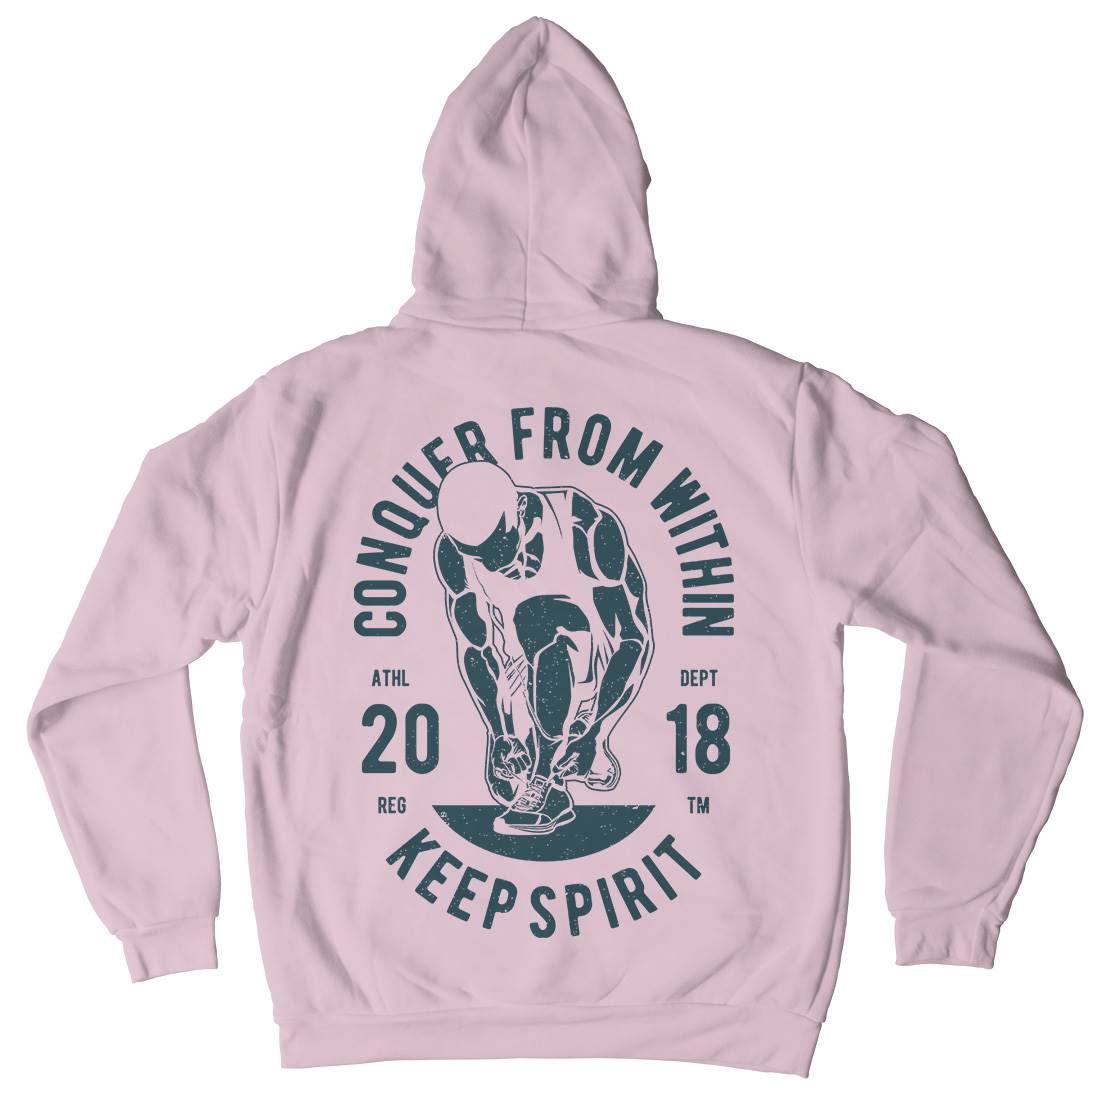 Conquer From Within Kids Crew Neck Hoodie Sport A638